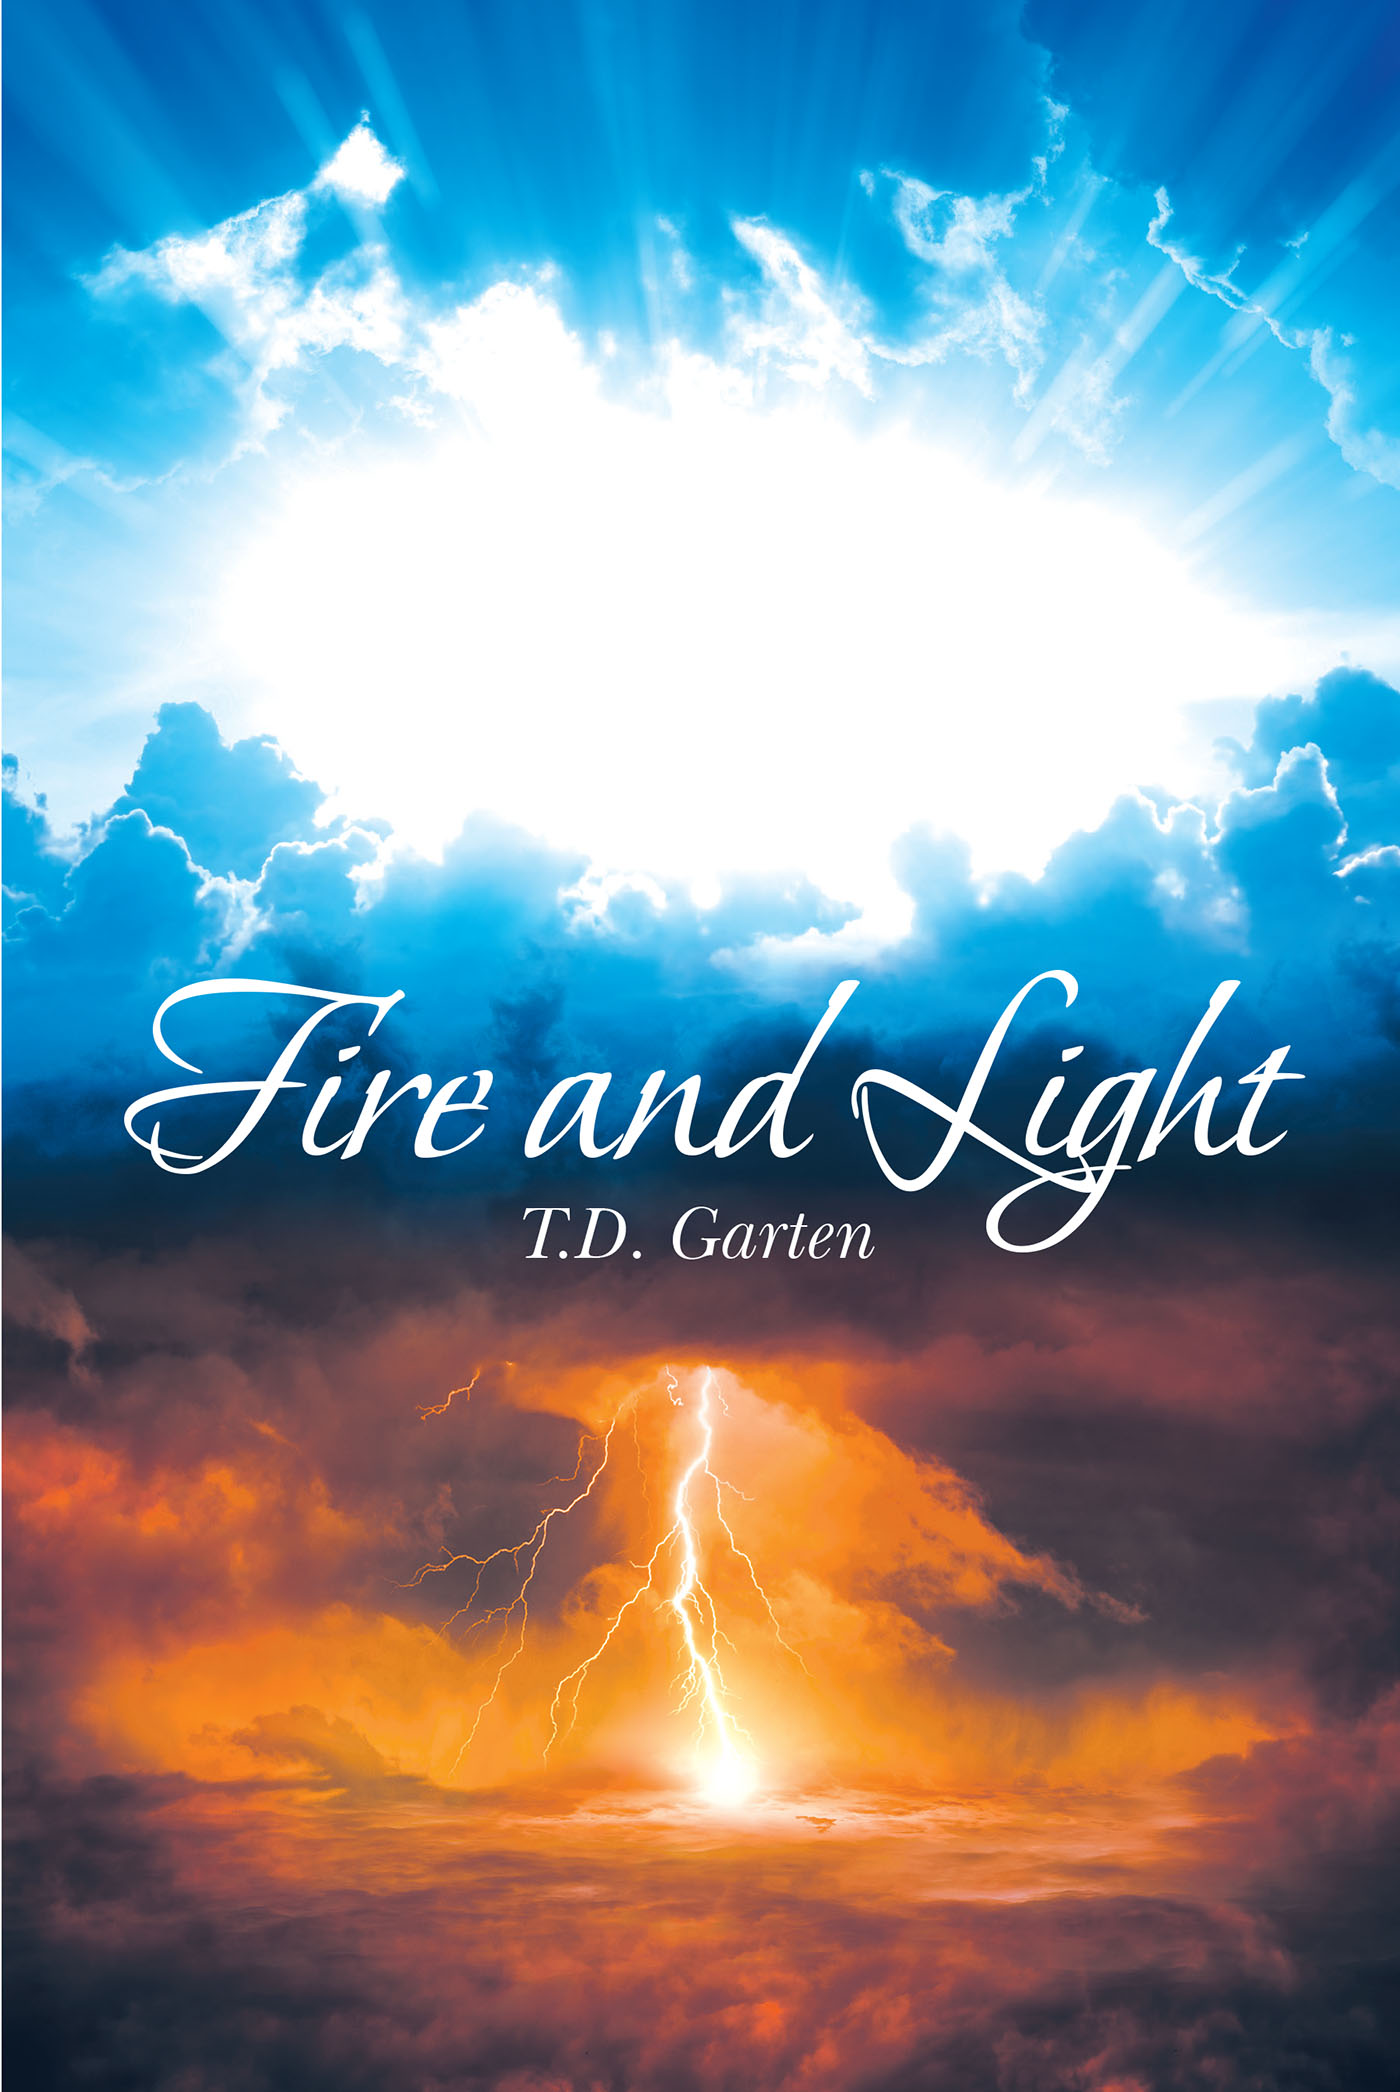 A Solstice of Fire and Light by Angela R. Watts